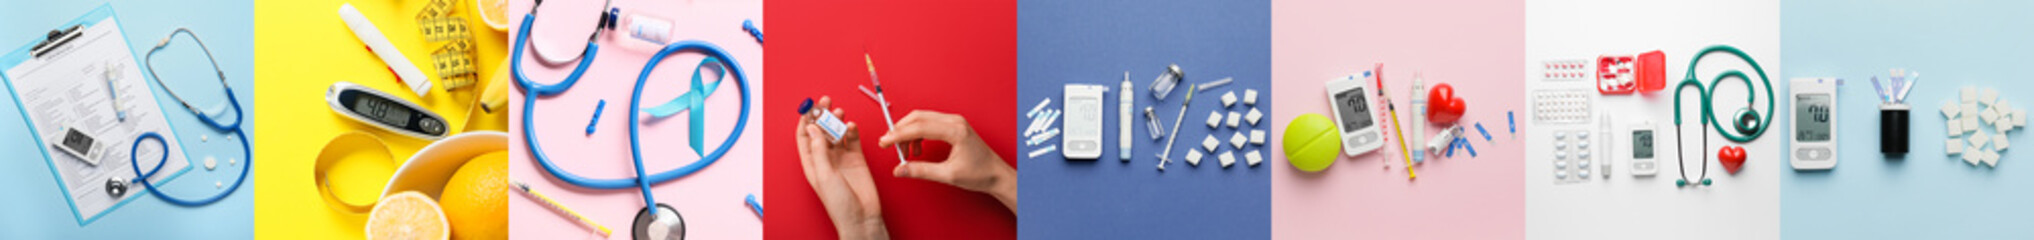 Collage of digital glucometers with healthy products, syringes, bottle of insulin and pills, top view